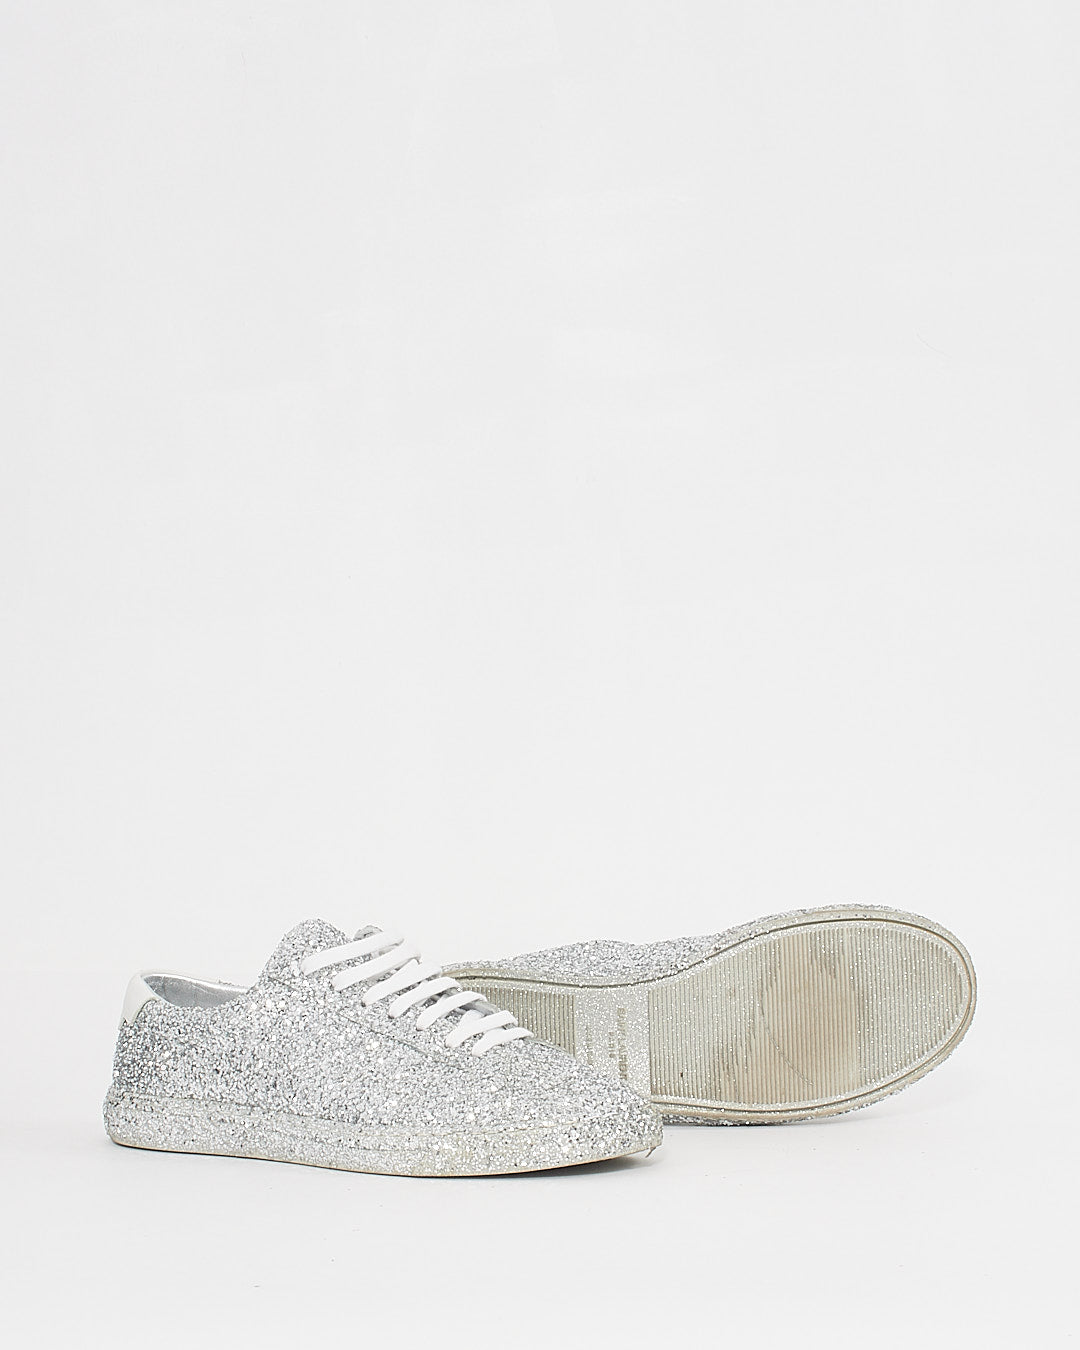 Saint Laurent Silver Glitter Andy Low-Top Sneakers - 39